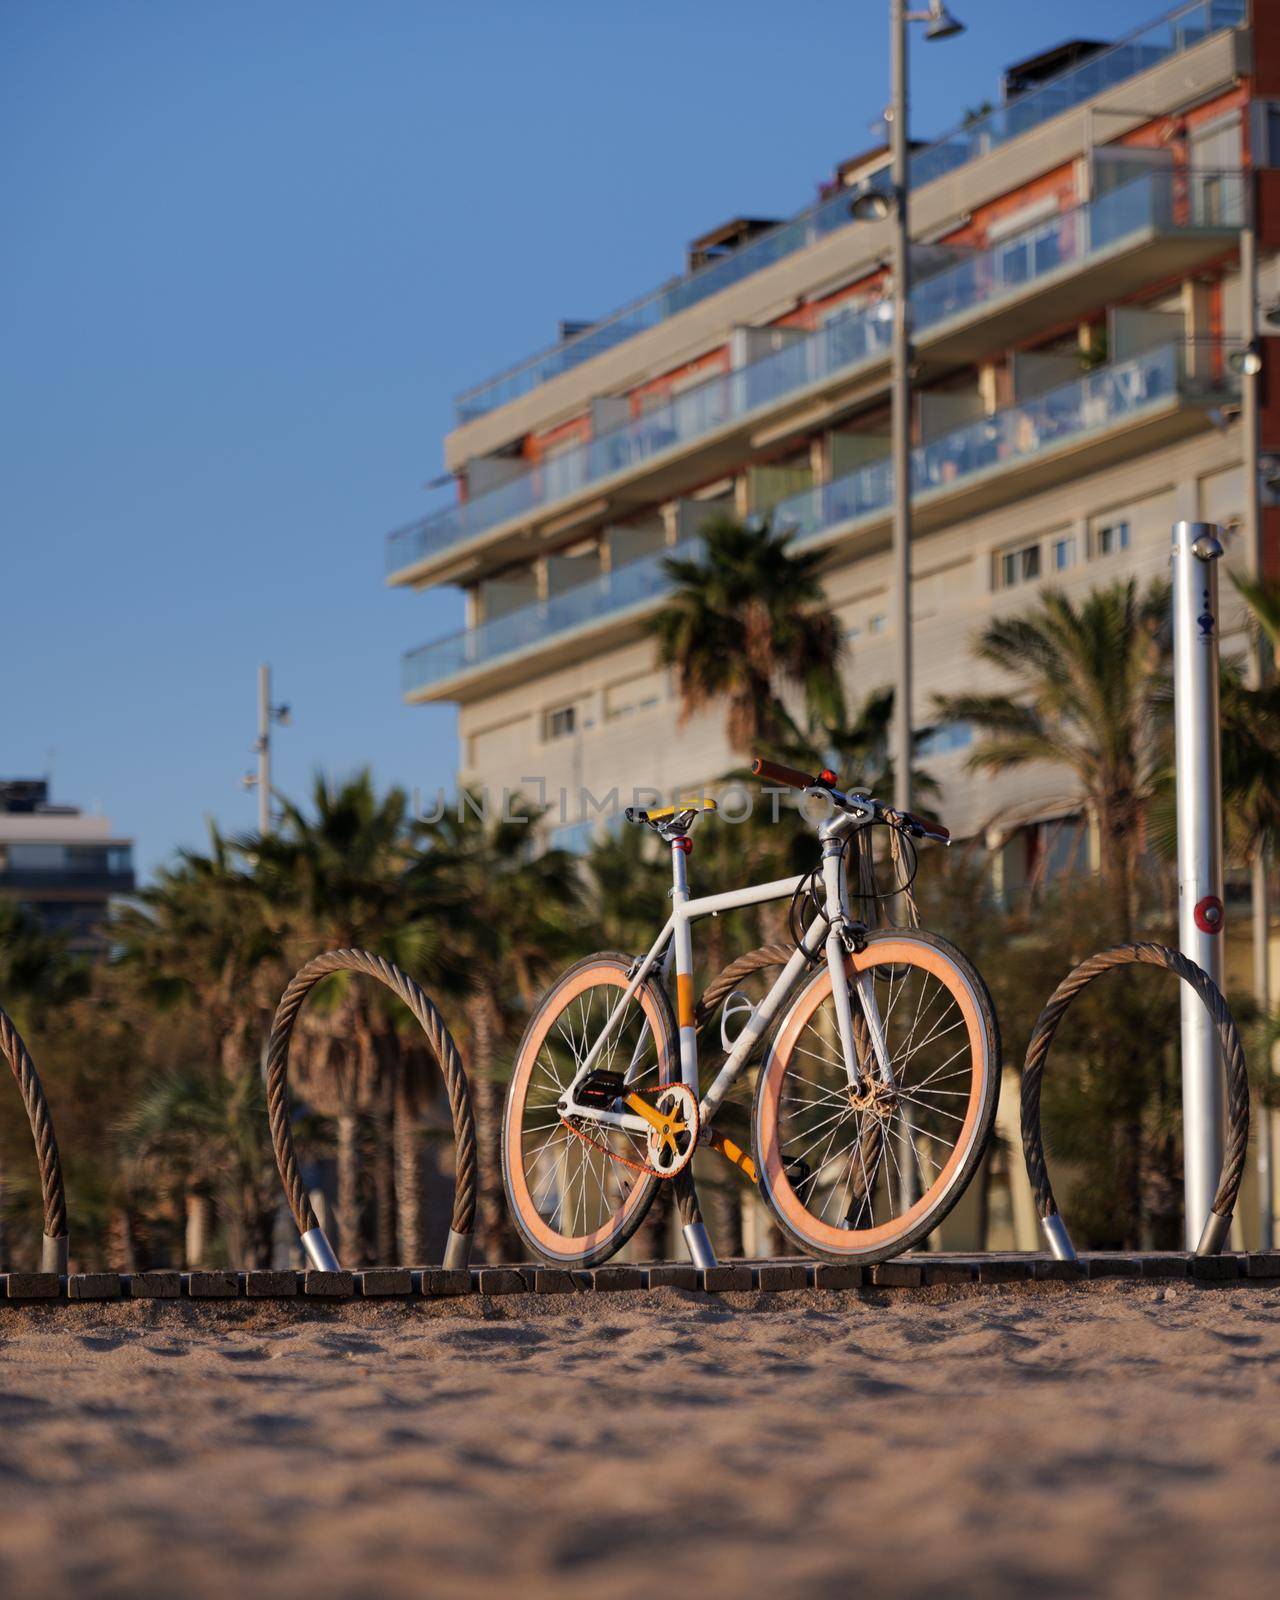 Bicycle with orange wheels parcked at the beach during sunrise